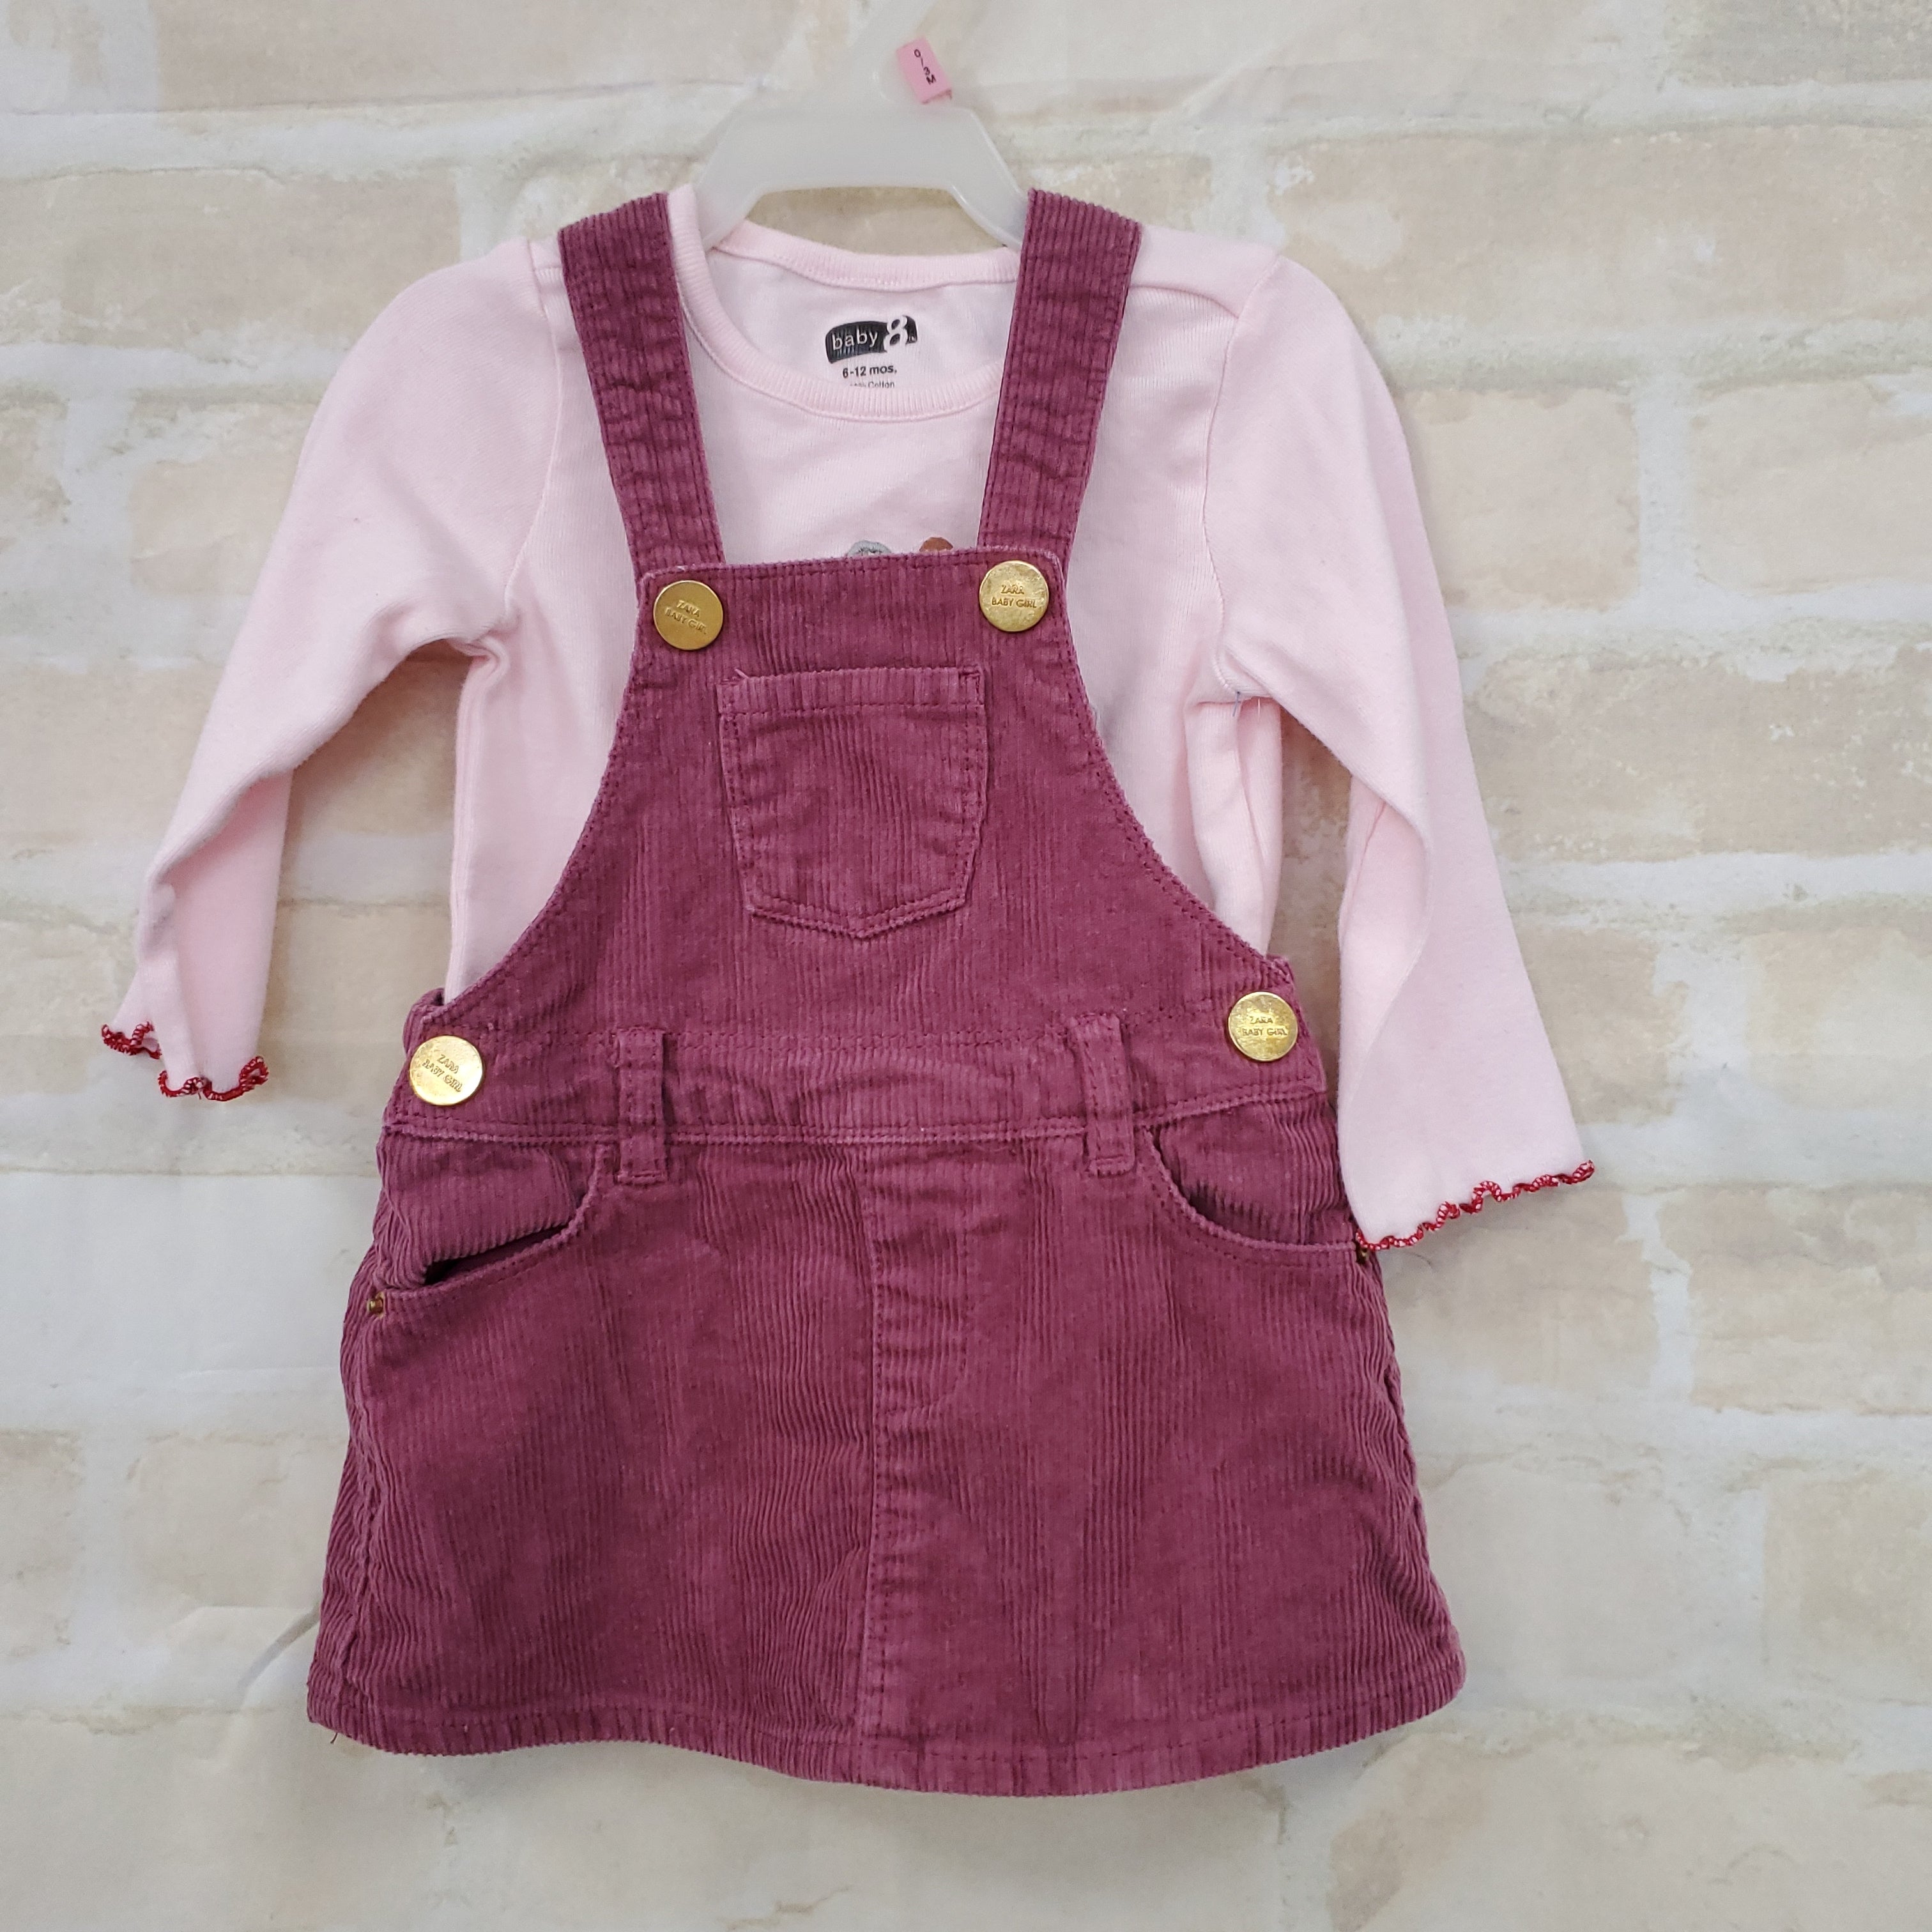 Baby 8 girls 2 pc set pink top L/S coveralls dusty rose 6-12m